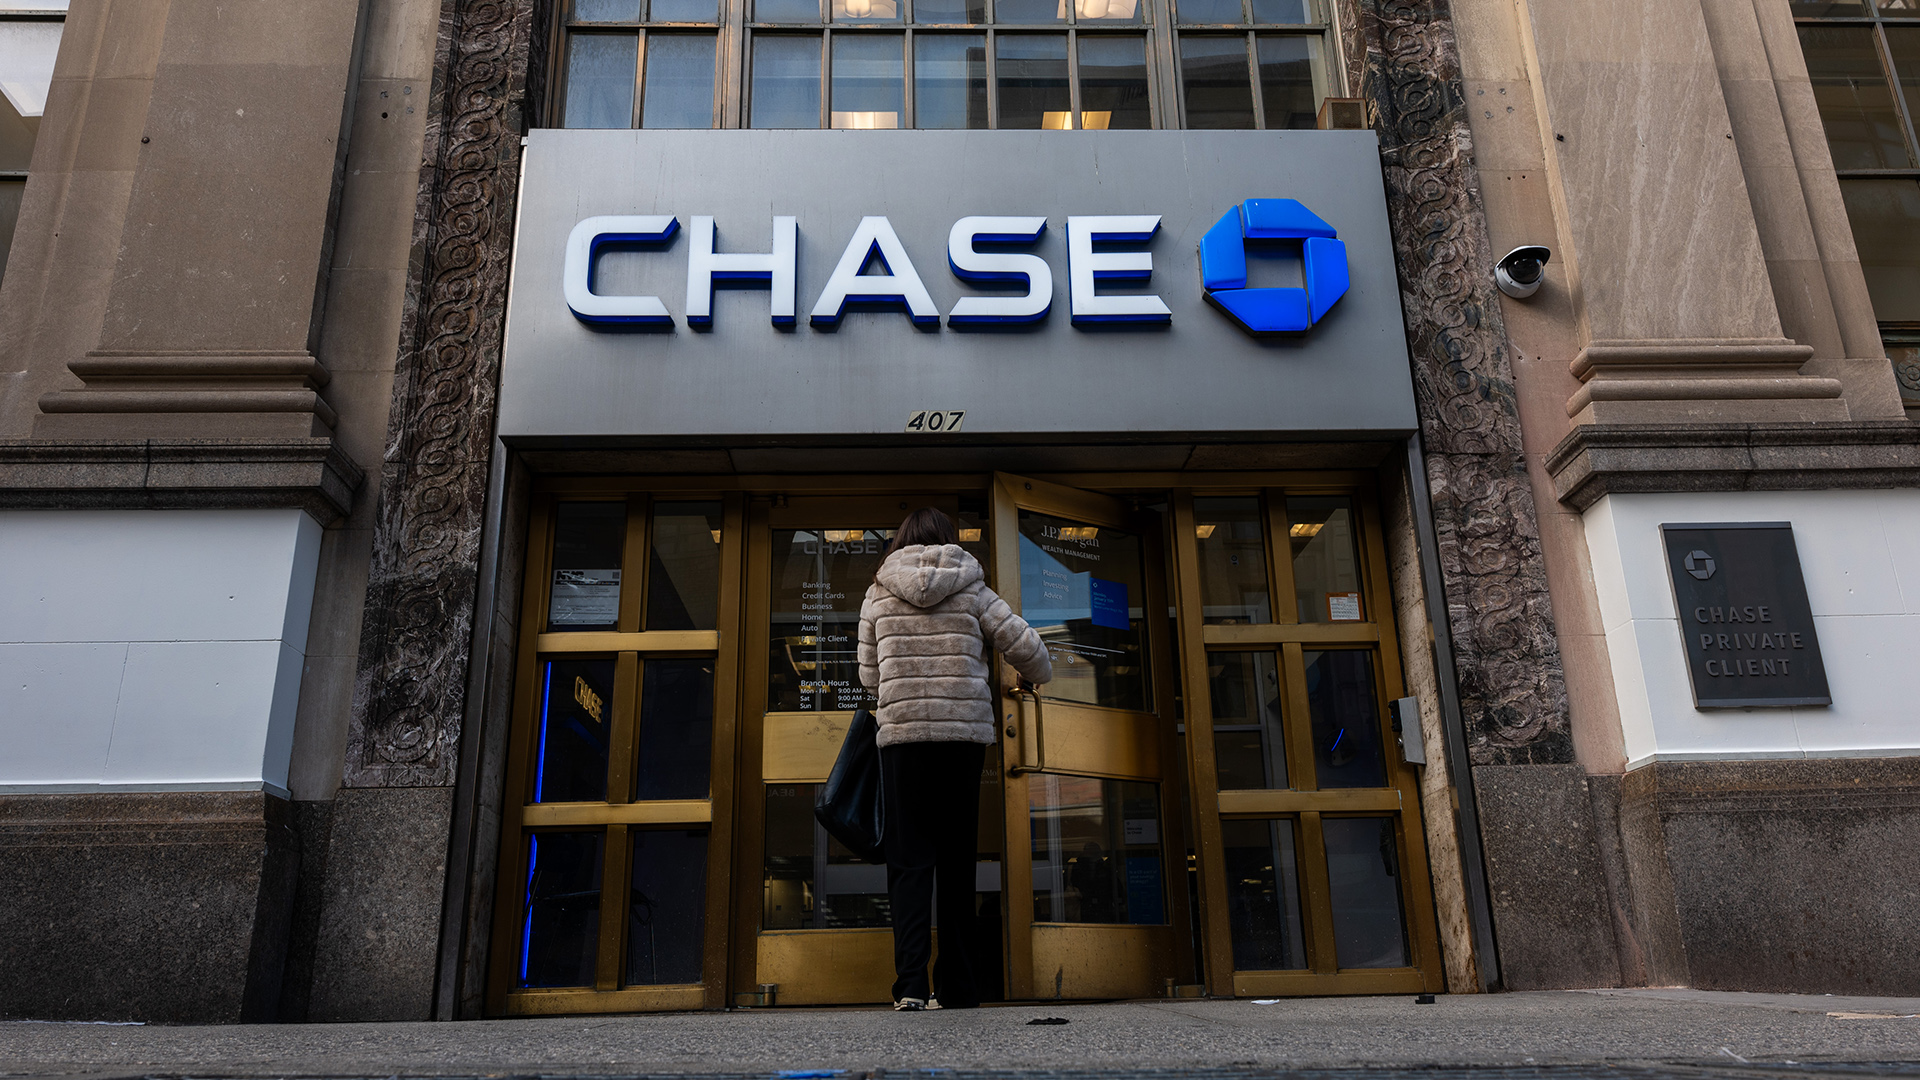 Chase users rage ‘blood sucking ticks’ as bank announces plans to add surcharges – and it would impact millions [Video]